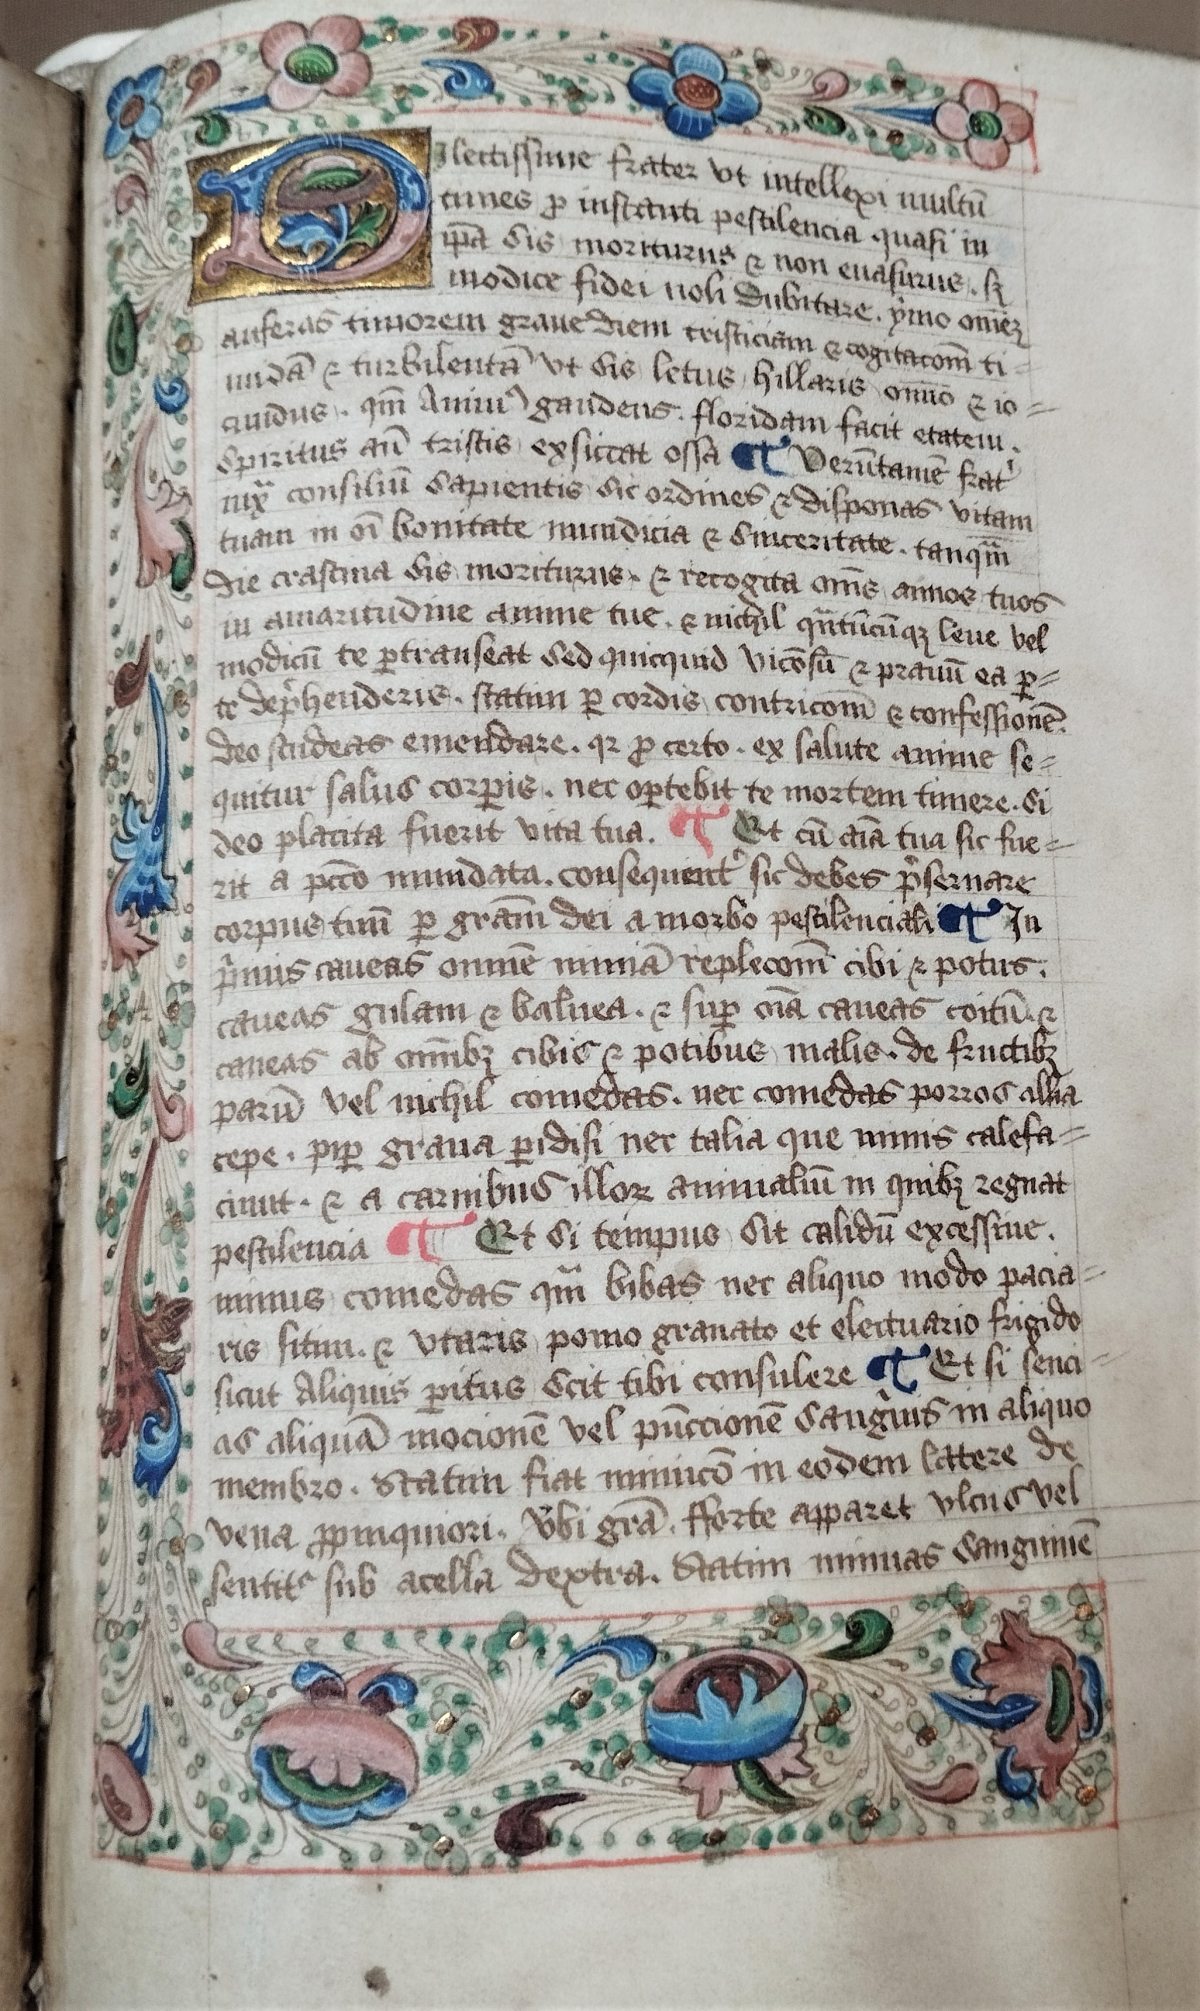 Decorated handwritten page, text in Latin, decorations of flowers and natural elements in gold, red, blue and green.